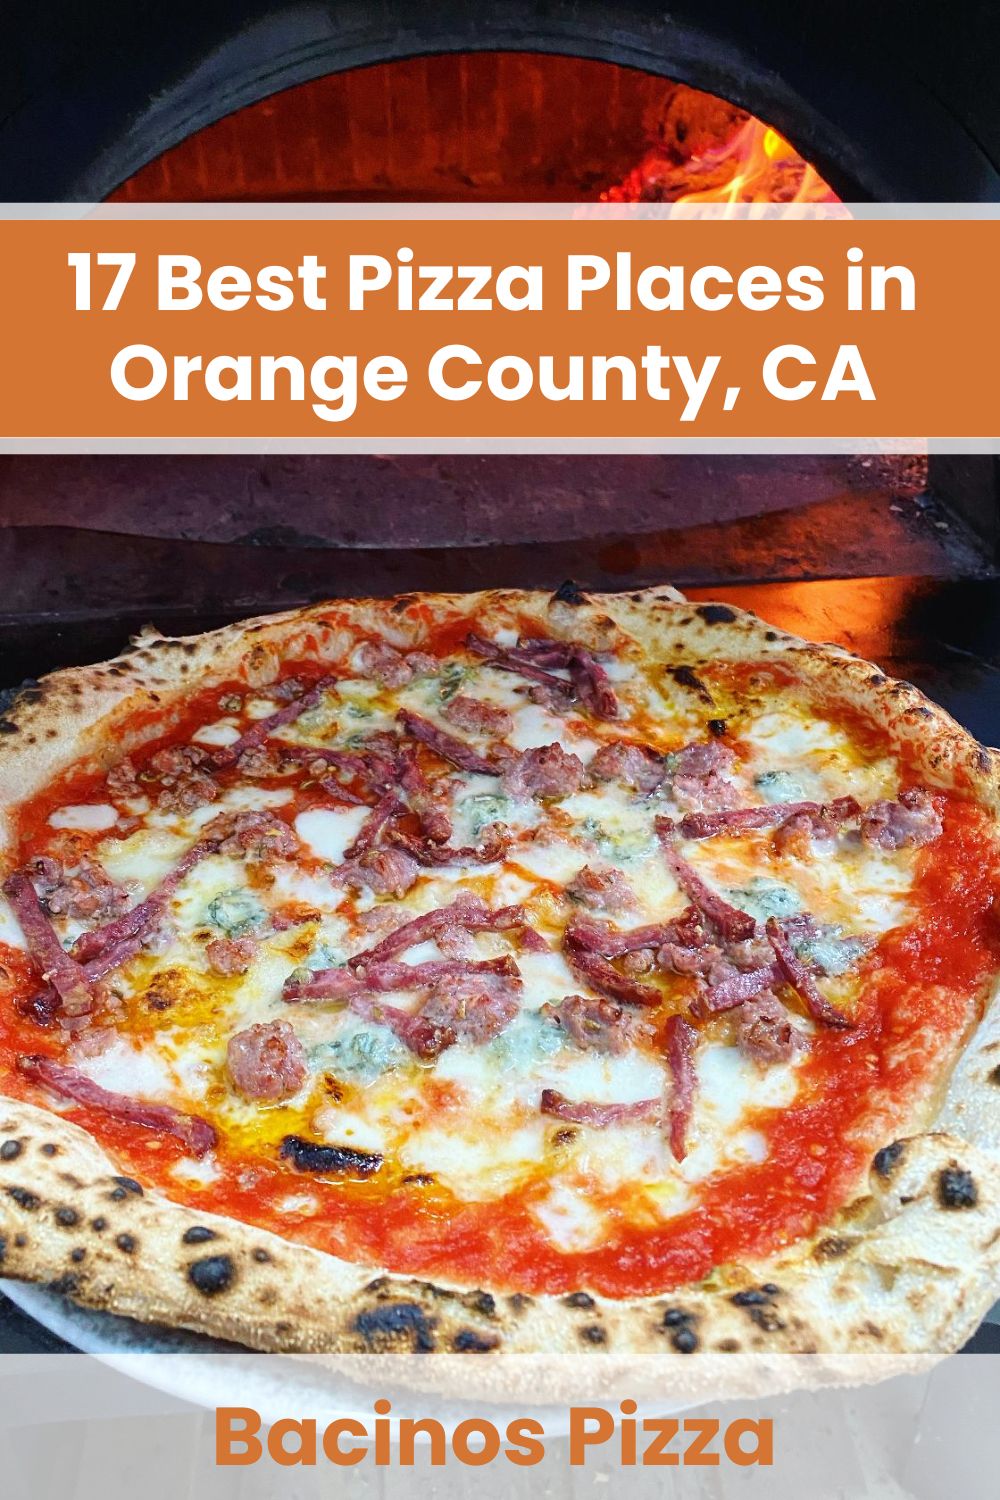 Pizza Places in Orange County